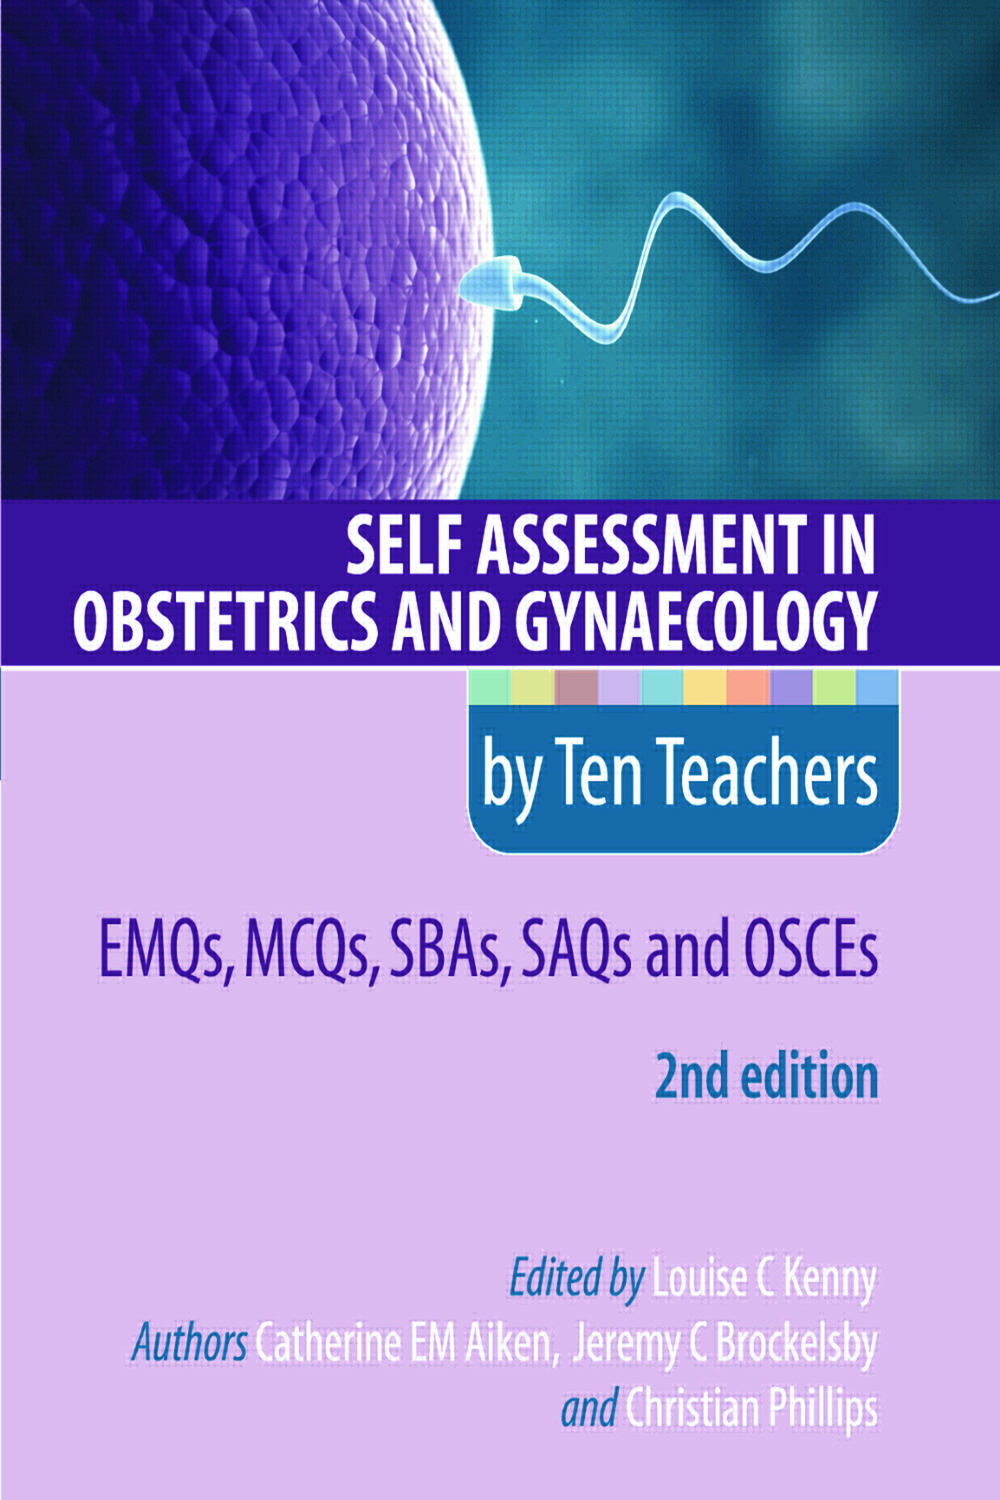 Download Self Assessment in Obstetrics and Gynaecology by Ten Teachers 2nd Edition PDF